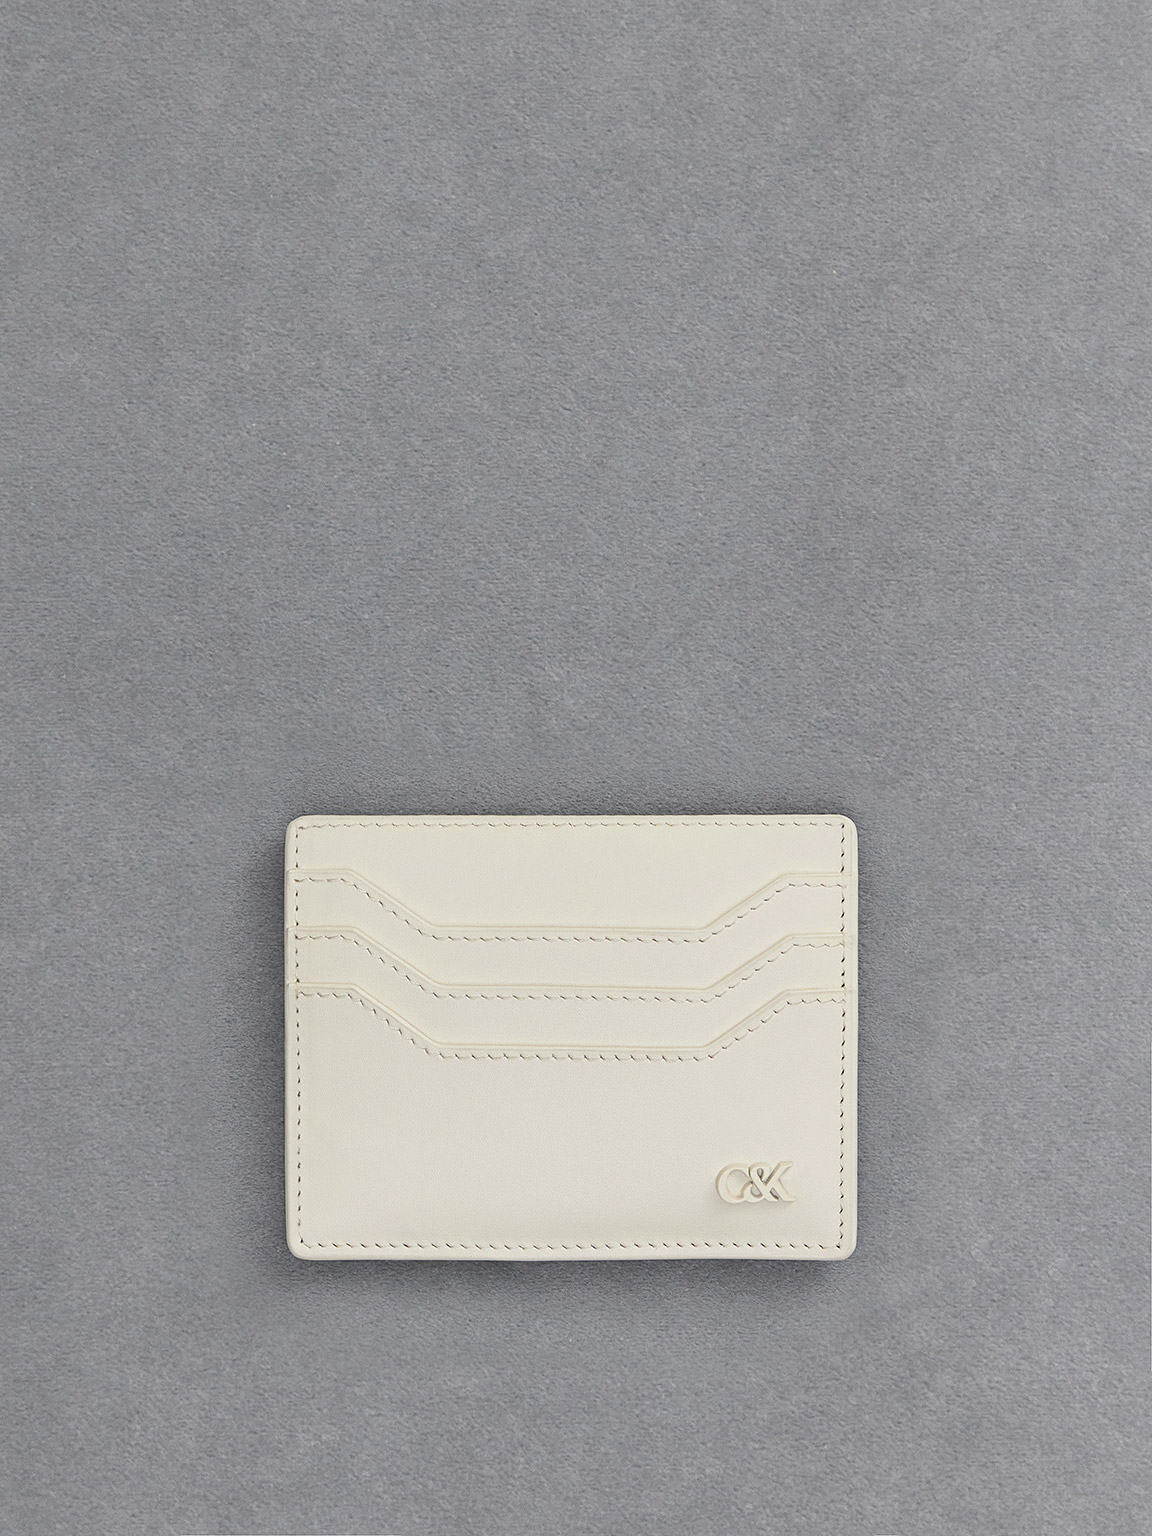 Charles & Keith Leather Multi-slot Card Holder In White